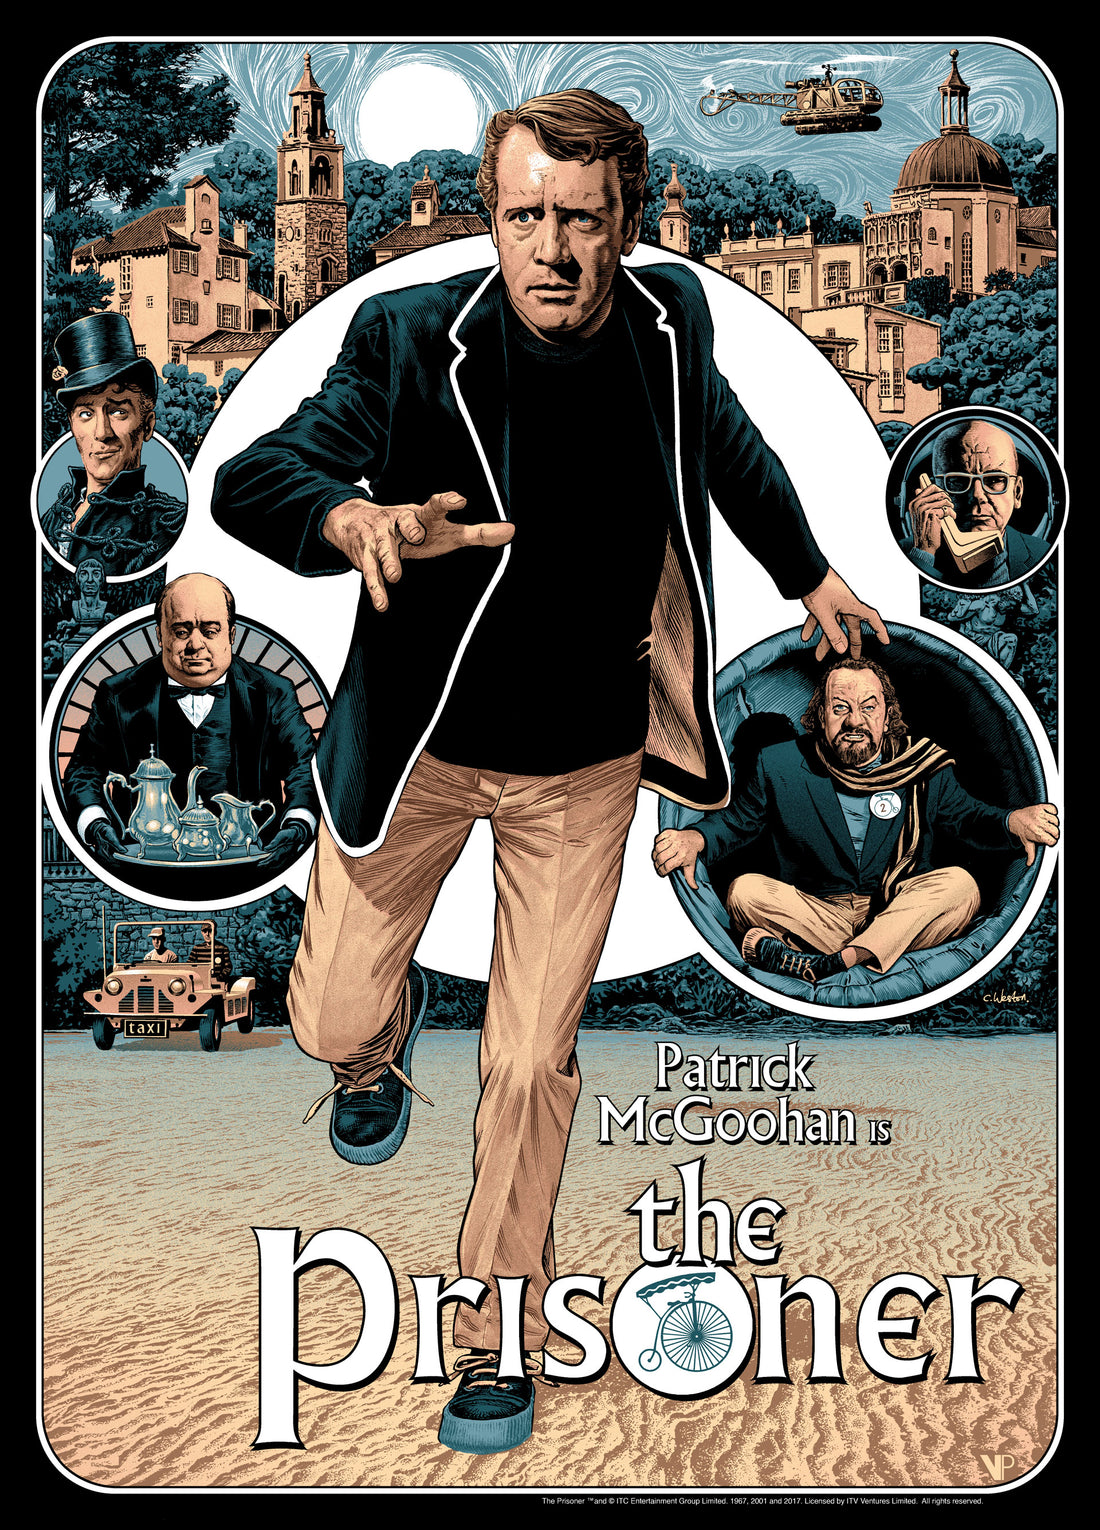 The Prisoner Official Licensed Limited Edition screen printed art poster Chris Weston Vice Press Variant